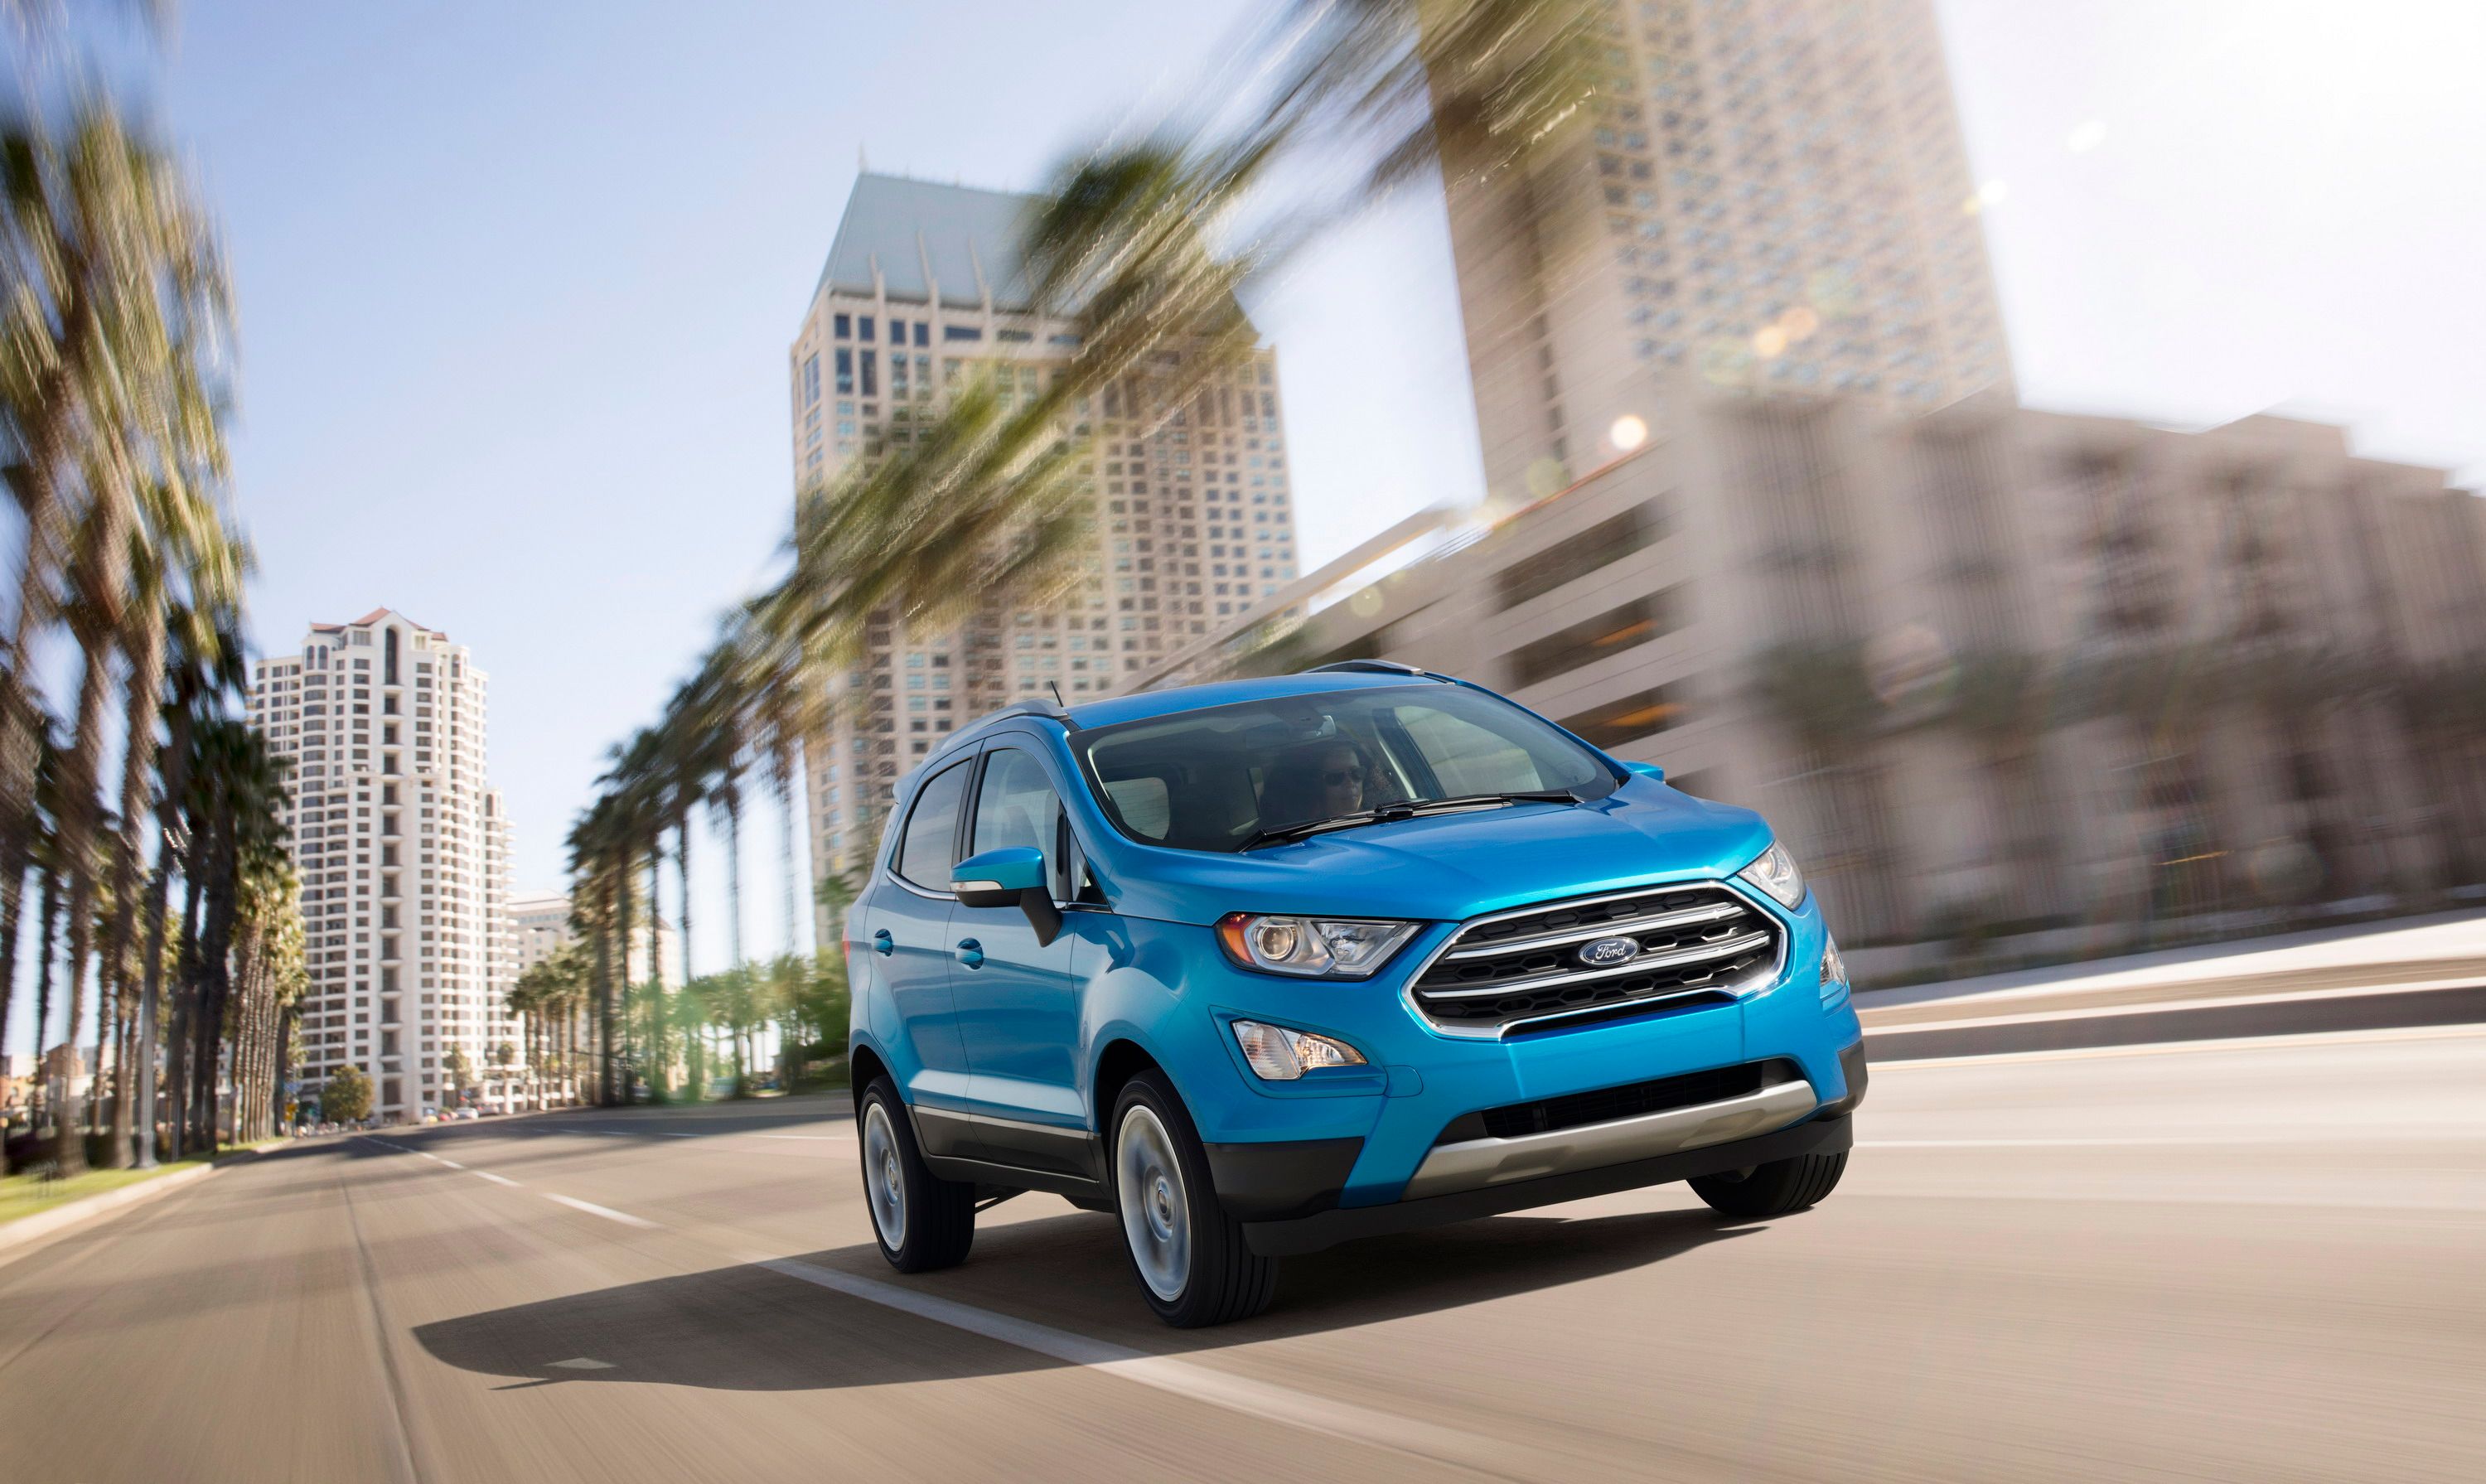 The Ford EcoSport is Finally Rolling into U.S. Dealers